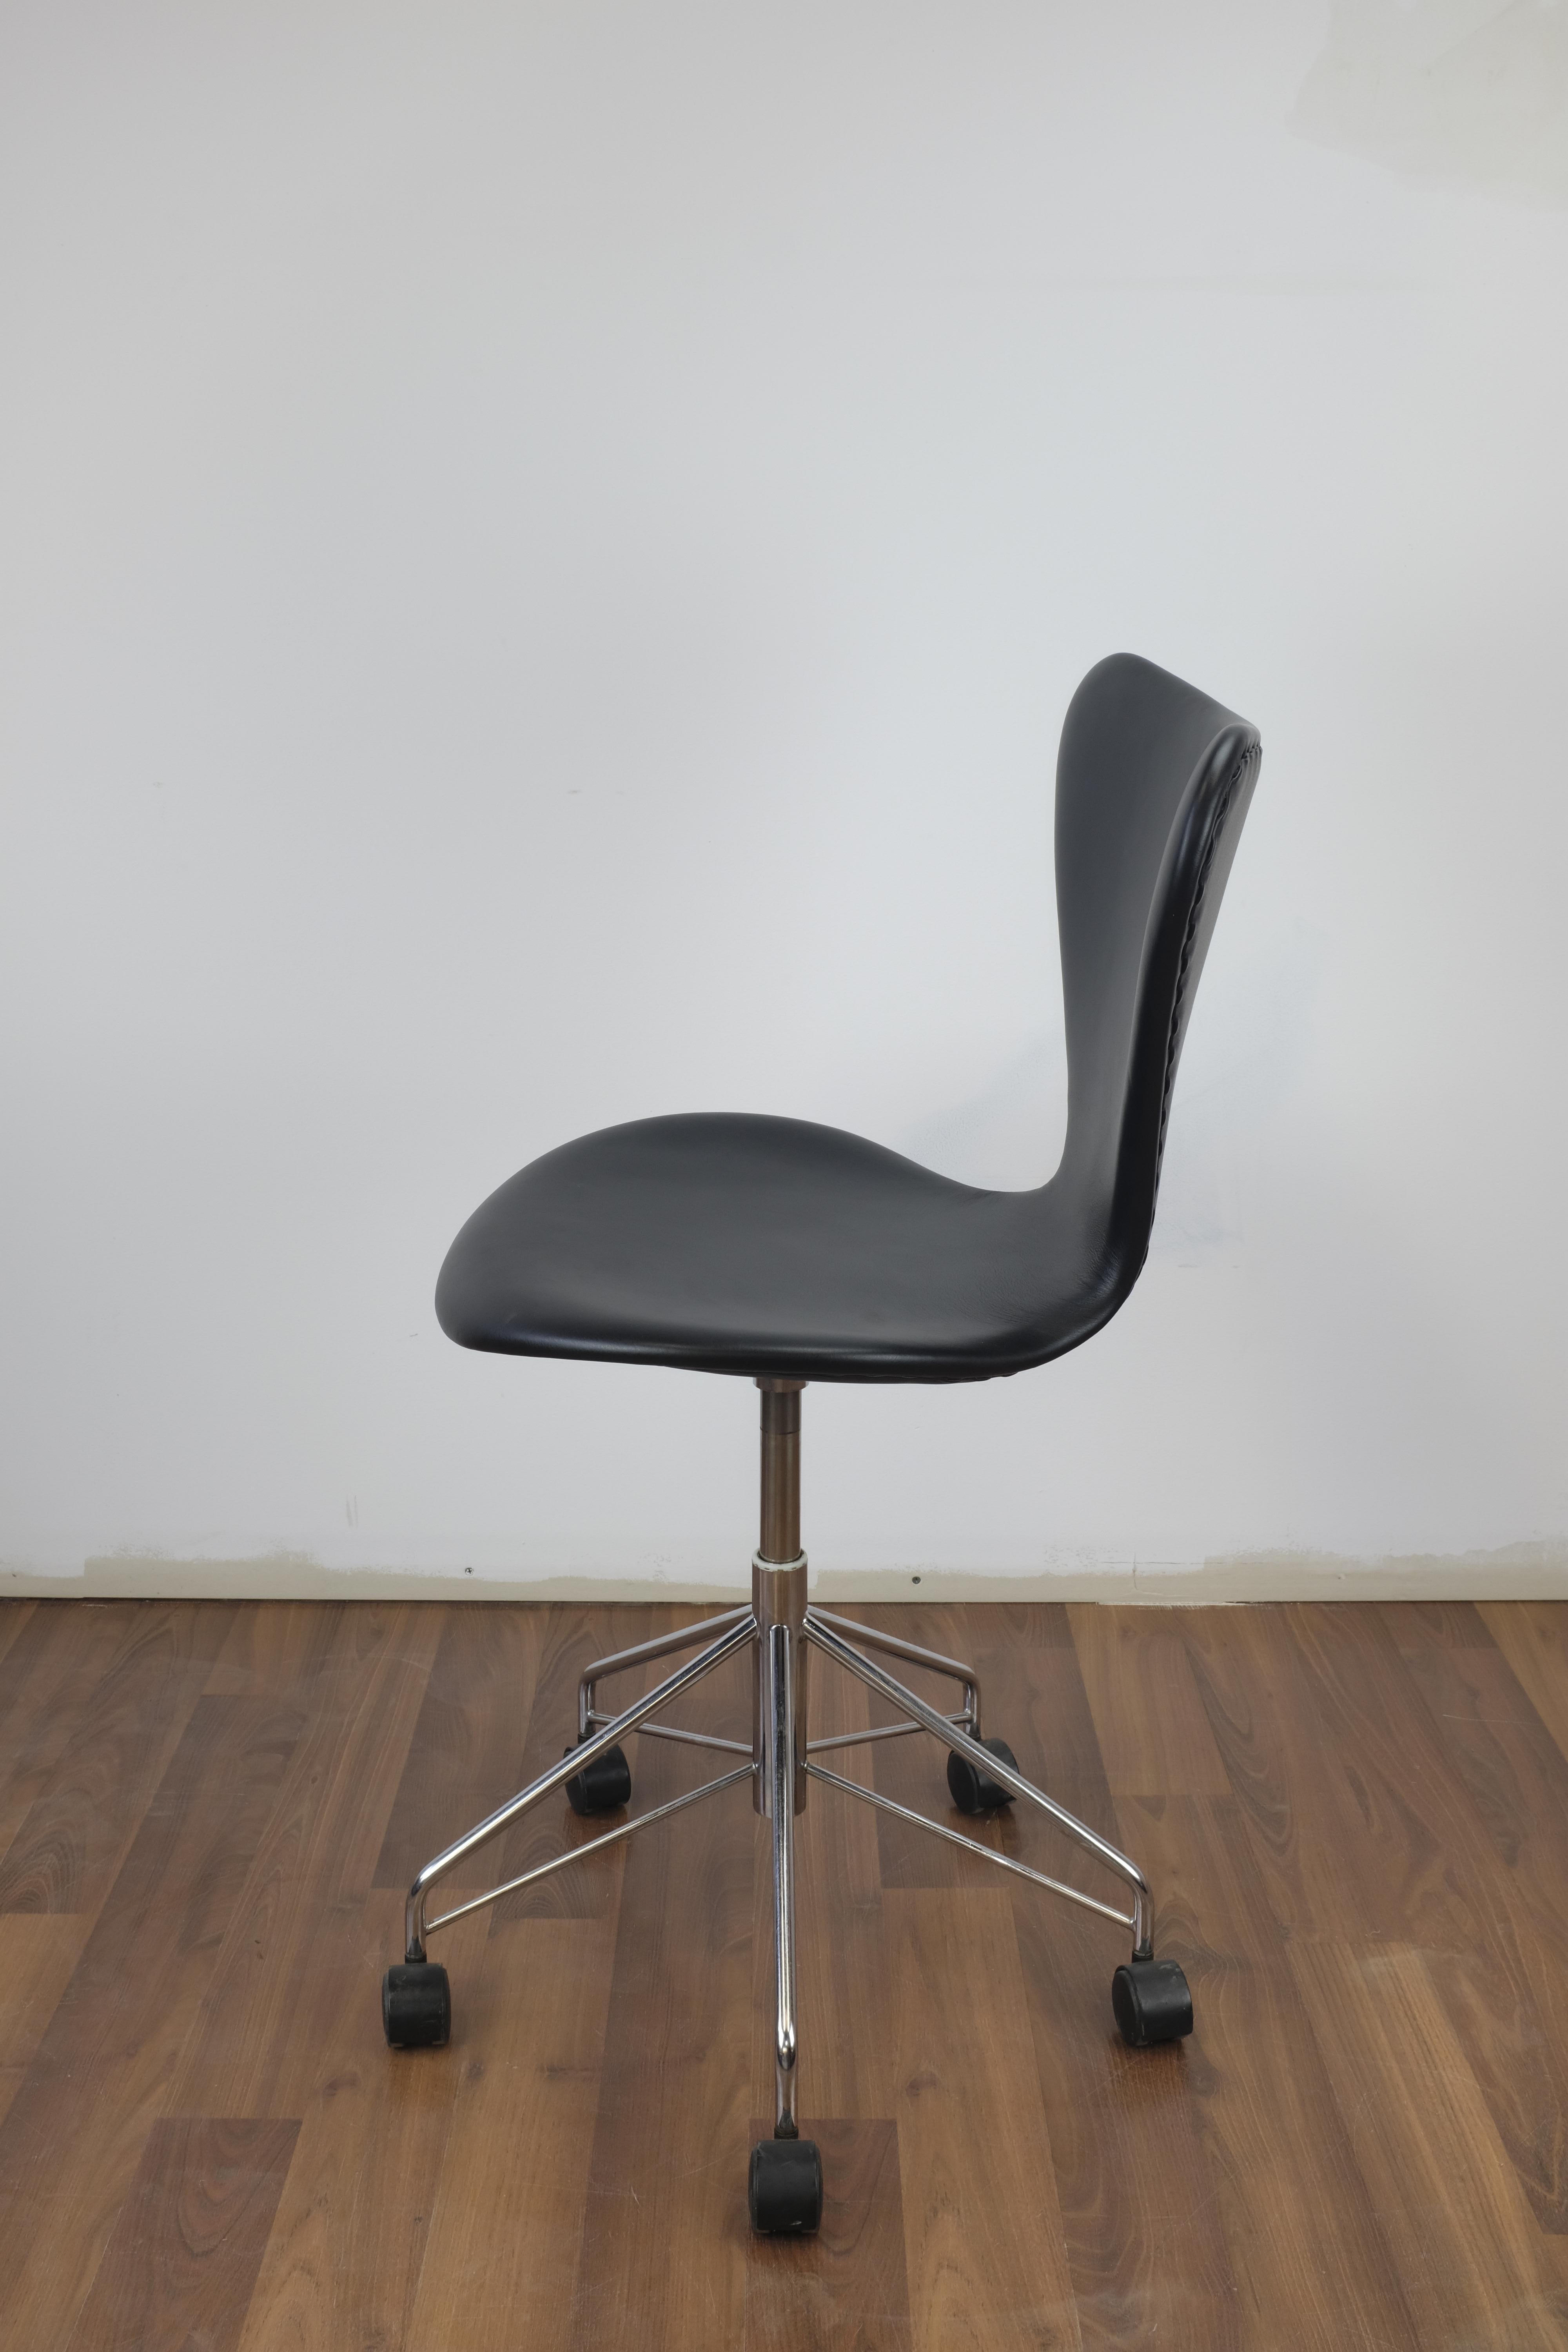 'Series 7' office chair designed designed by Arne Jacobsen in 1955. This example manufactured in Denmark by Fritz Hansen in 1998.

Seat is made of pressure moulded veneer and has been reupholstered in black leather. The swivel base is made of